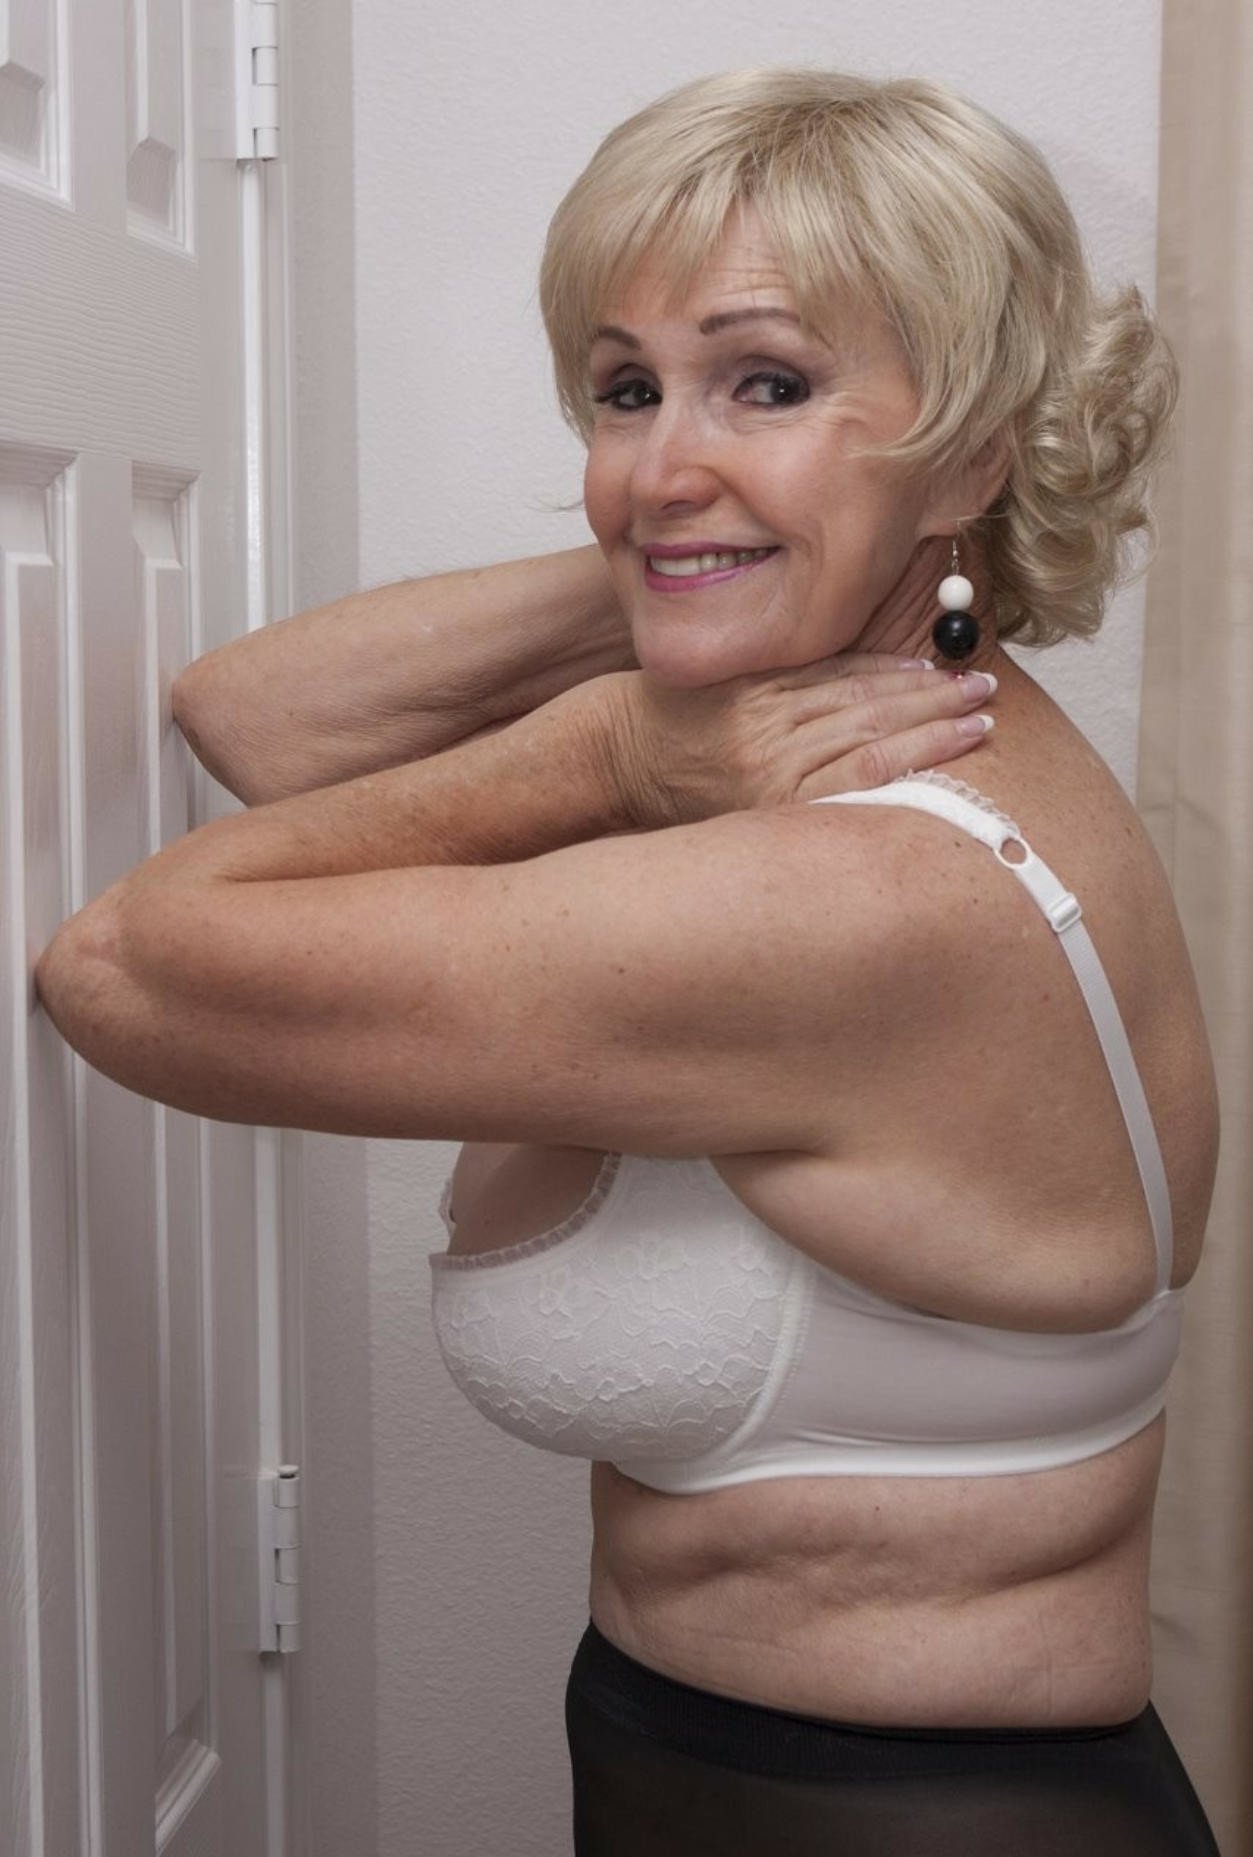 Vintage Busty Granny - Busty Grannies in Lingerie - 25 photos